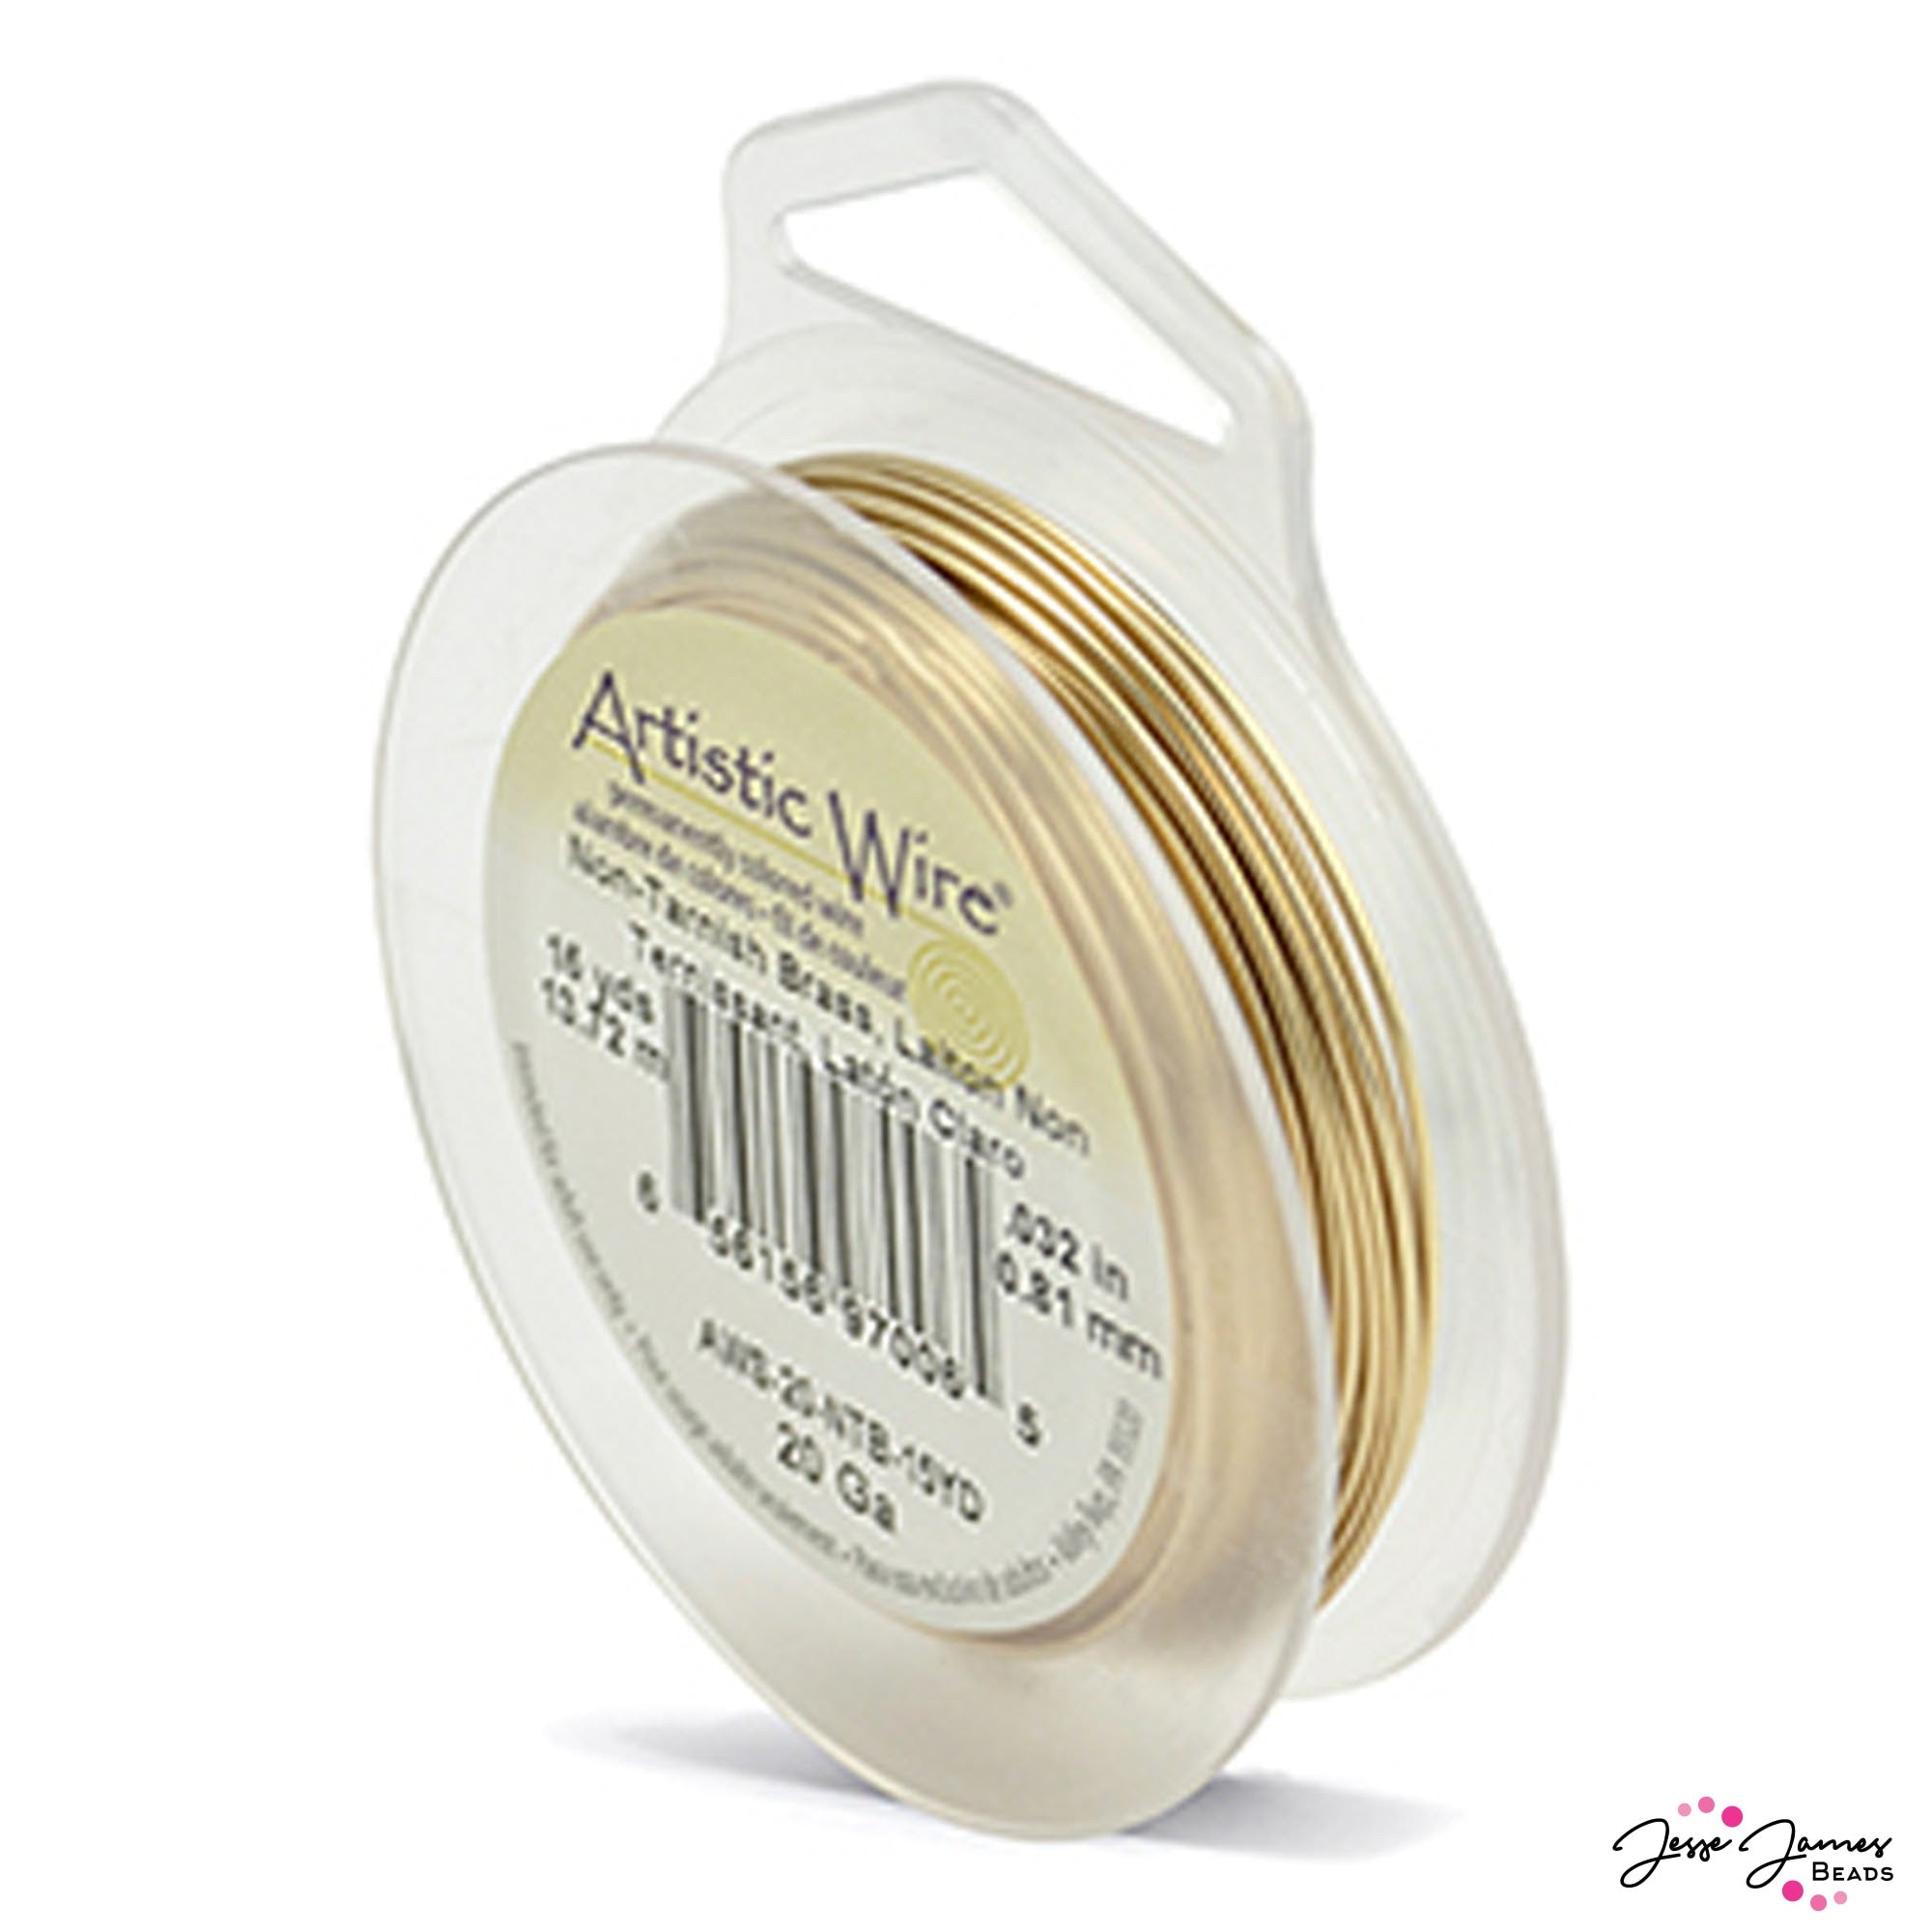 Artistic Beading Wire in Brass 20g